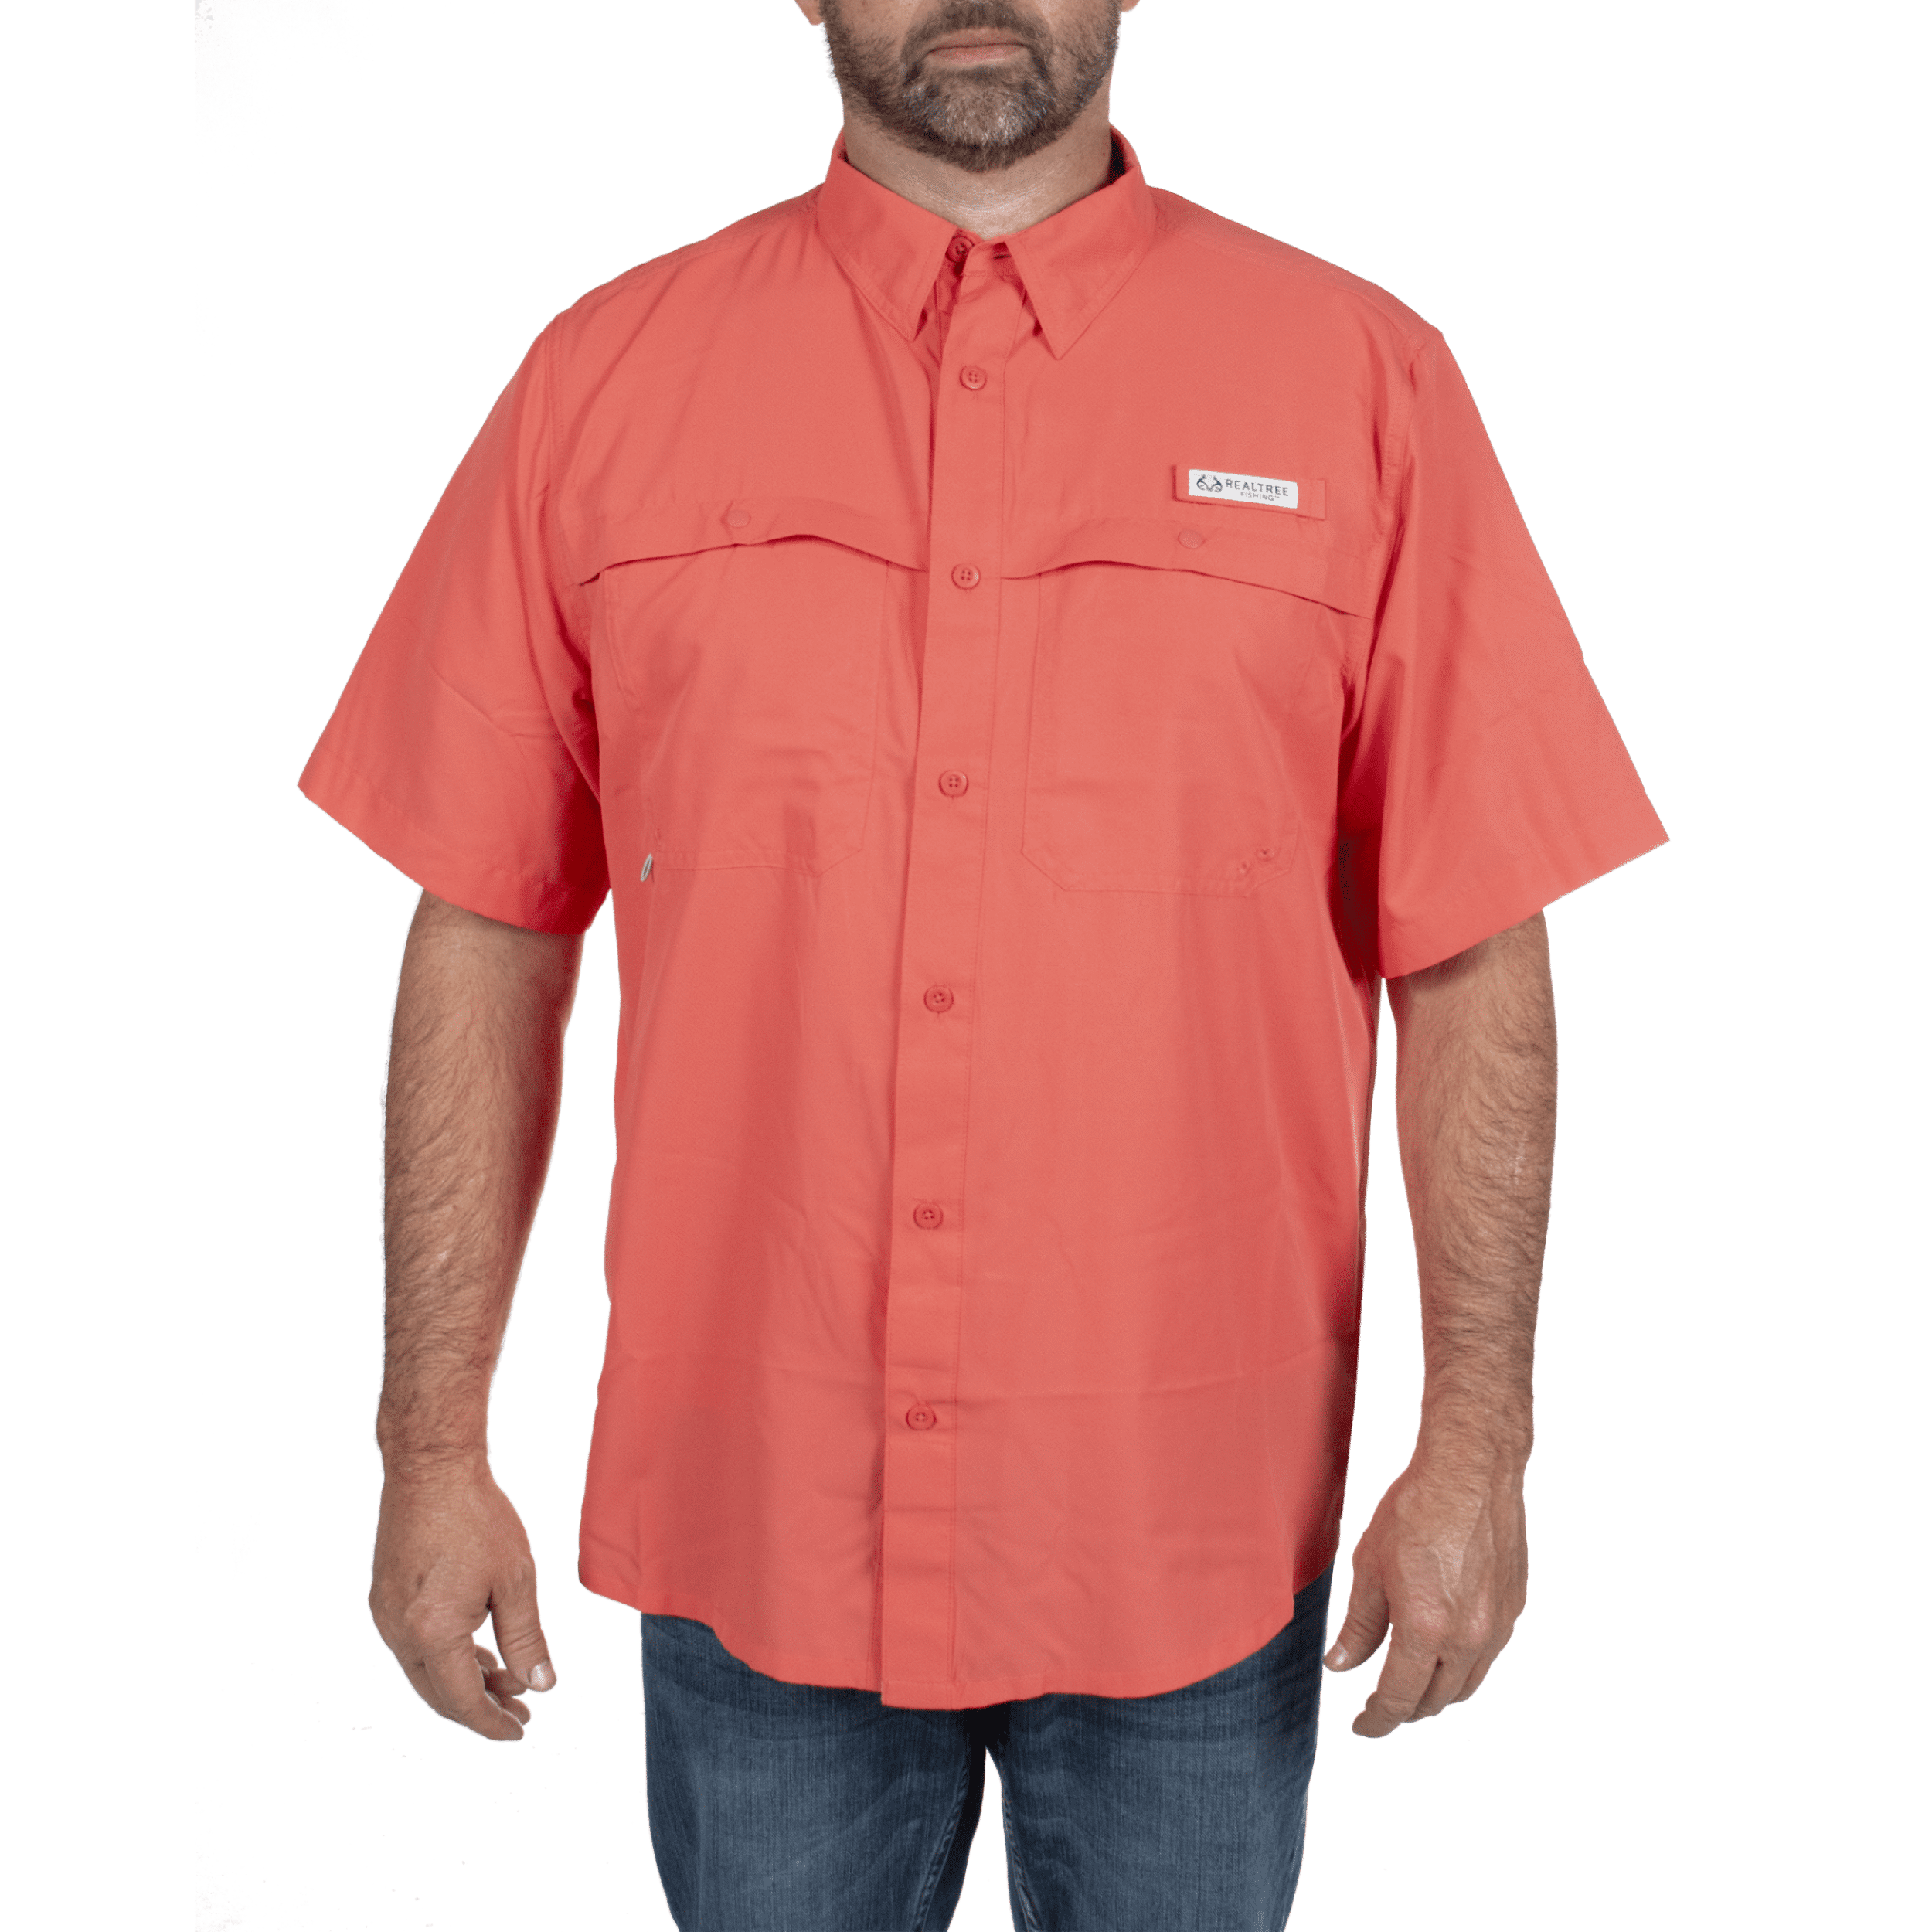 Realtree Short Sleeve Button Down Shirt (Men's), 1 Count, 1 Pack